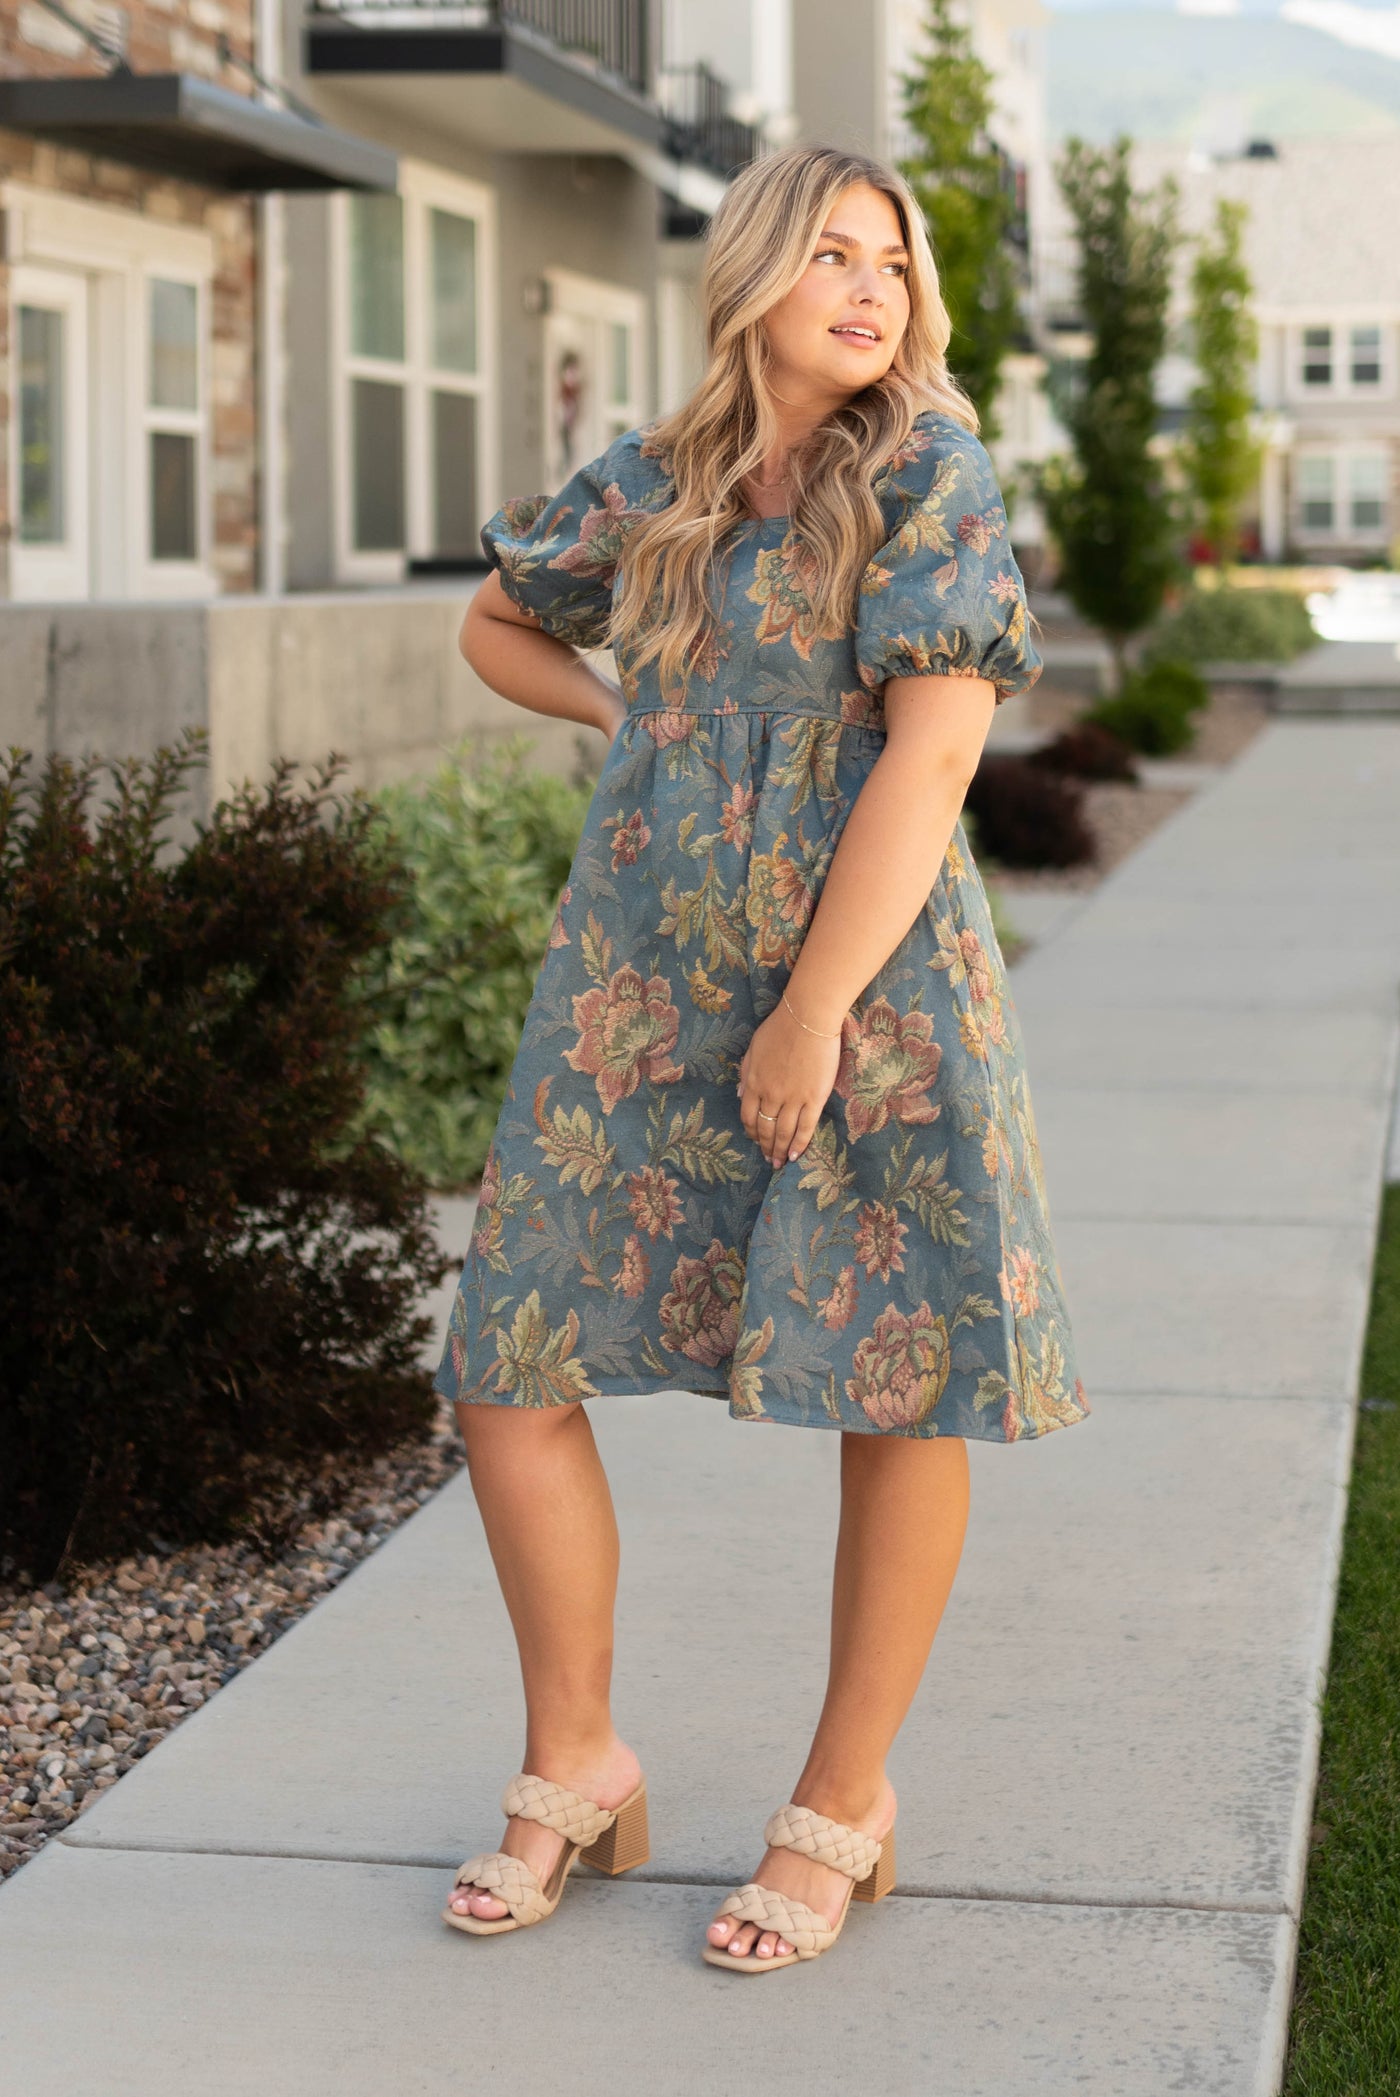 Teal floral dress with short sleeves